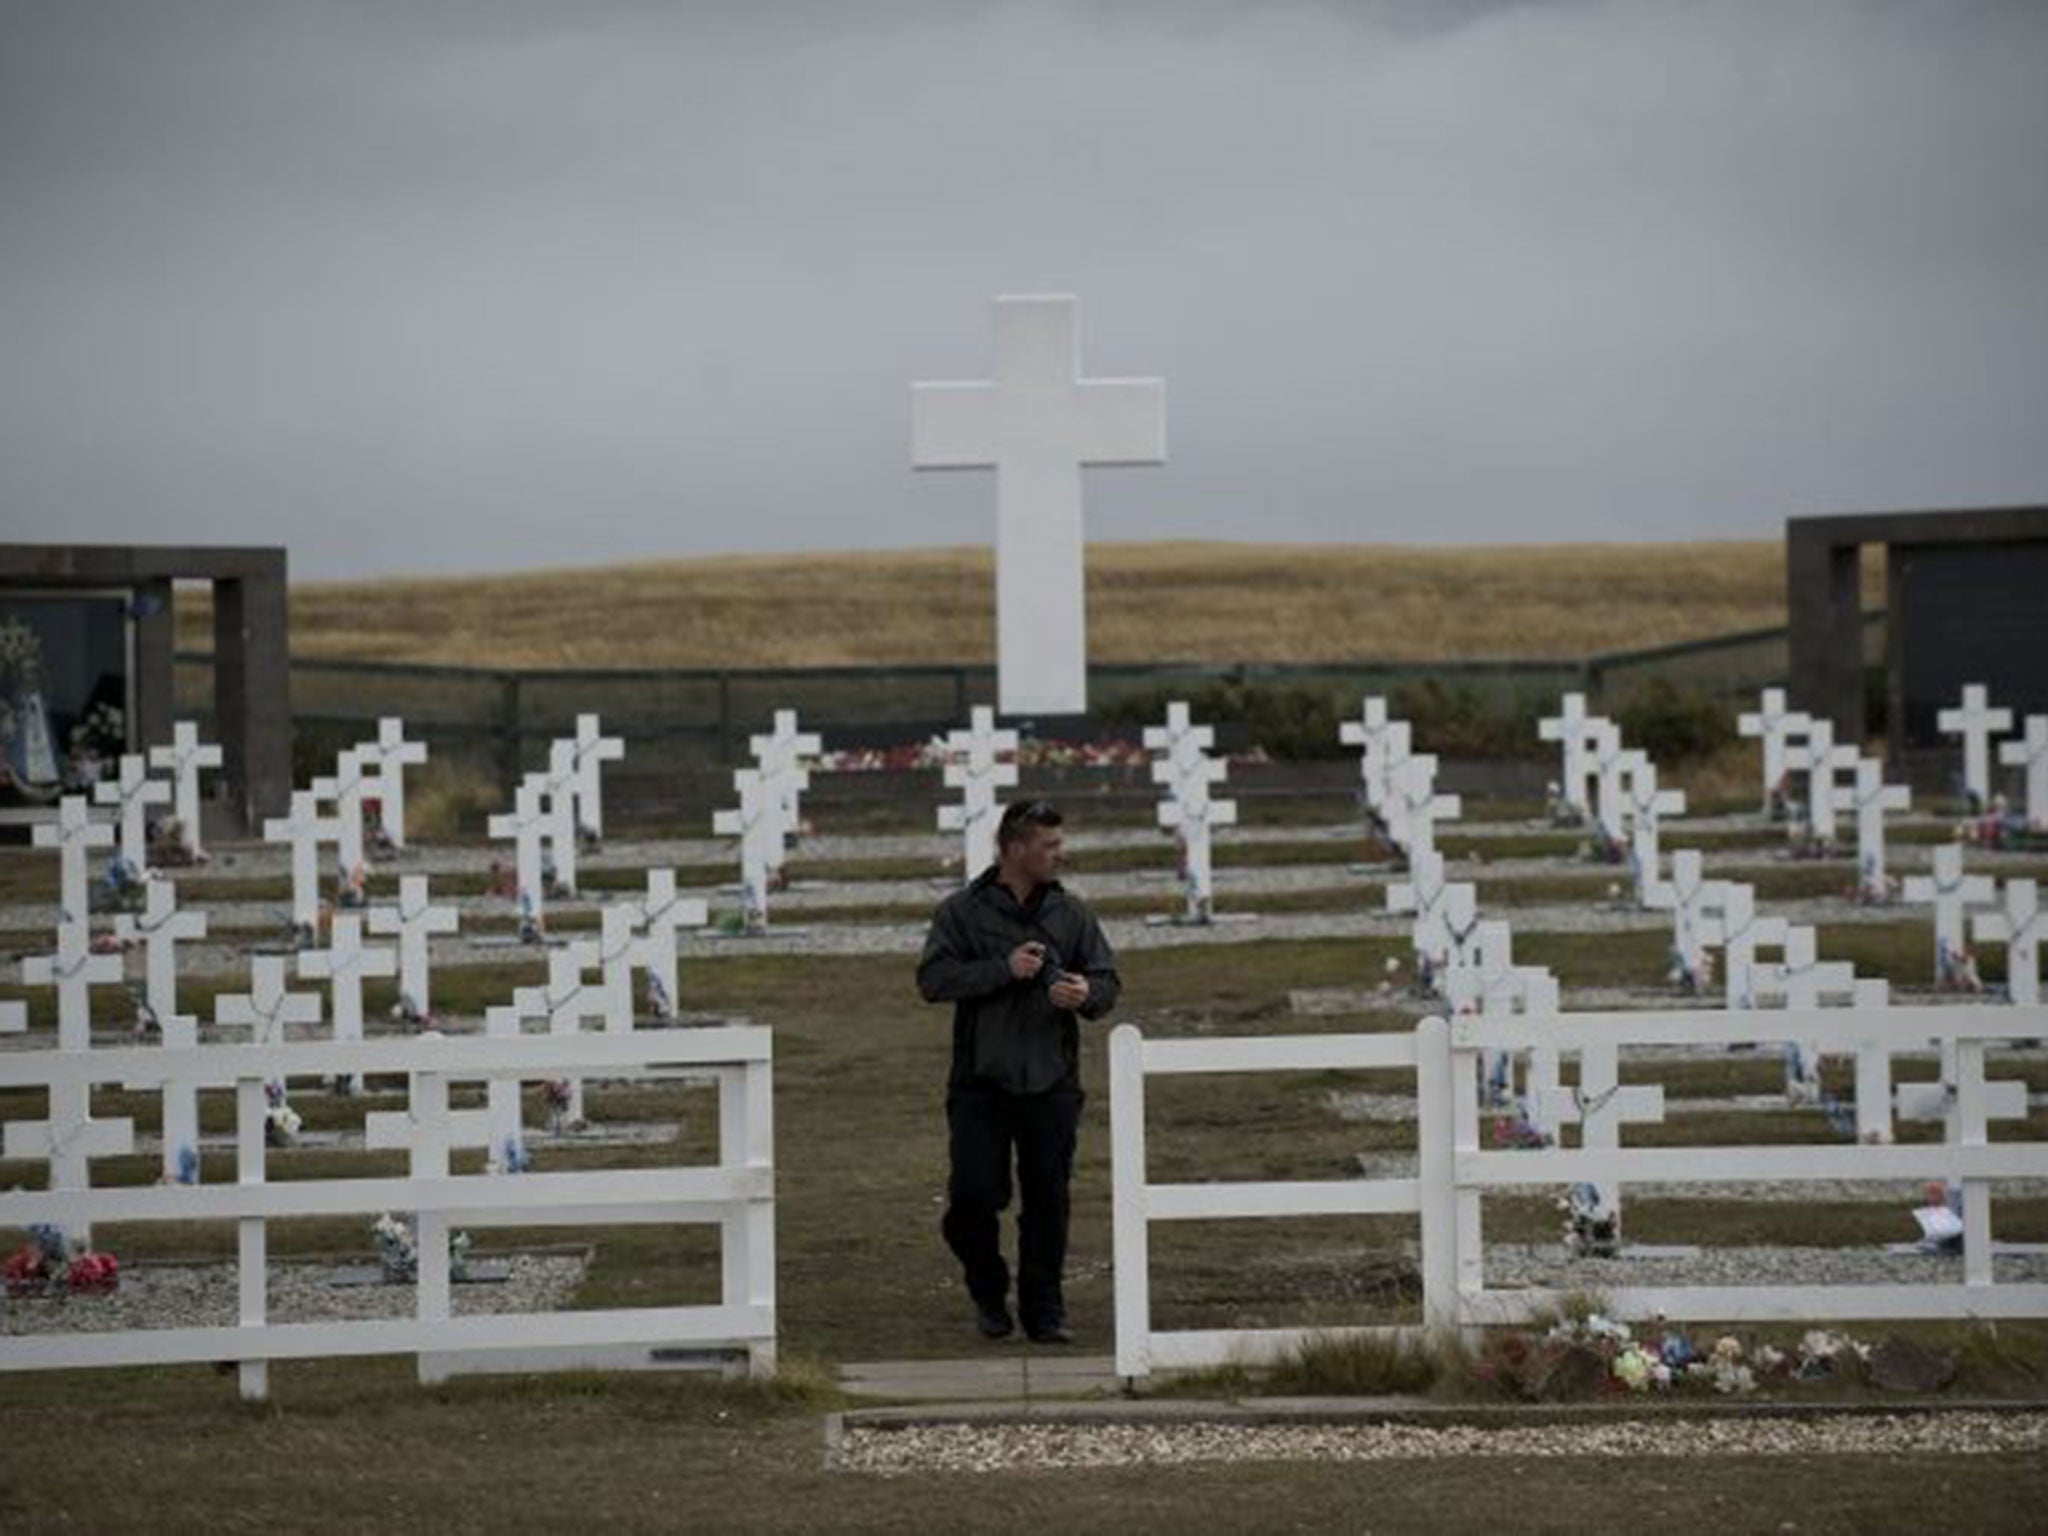 Sebastian Socodo (in charge of cemetery maintenance) walks among the tombstones at the Argentine cemetery in the Falkland Islands